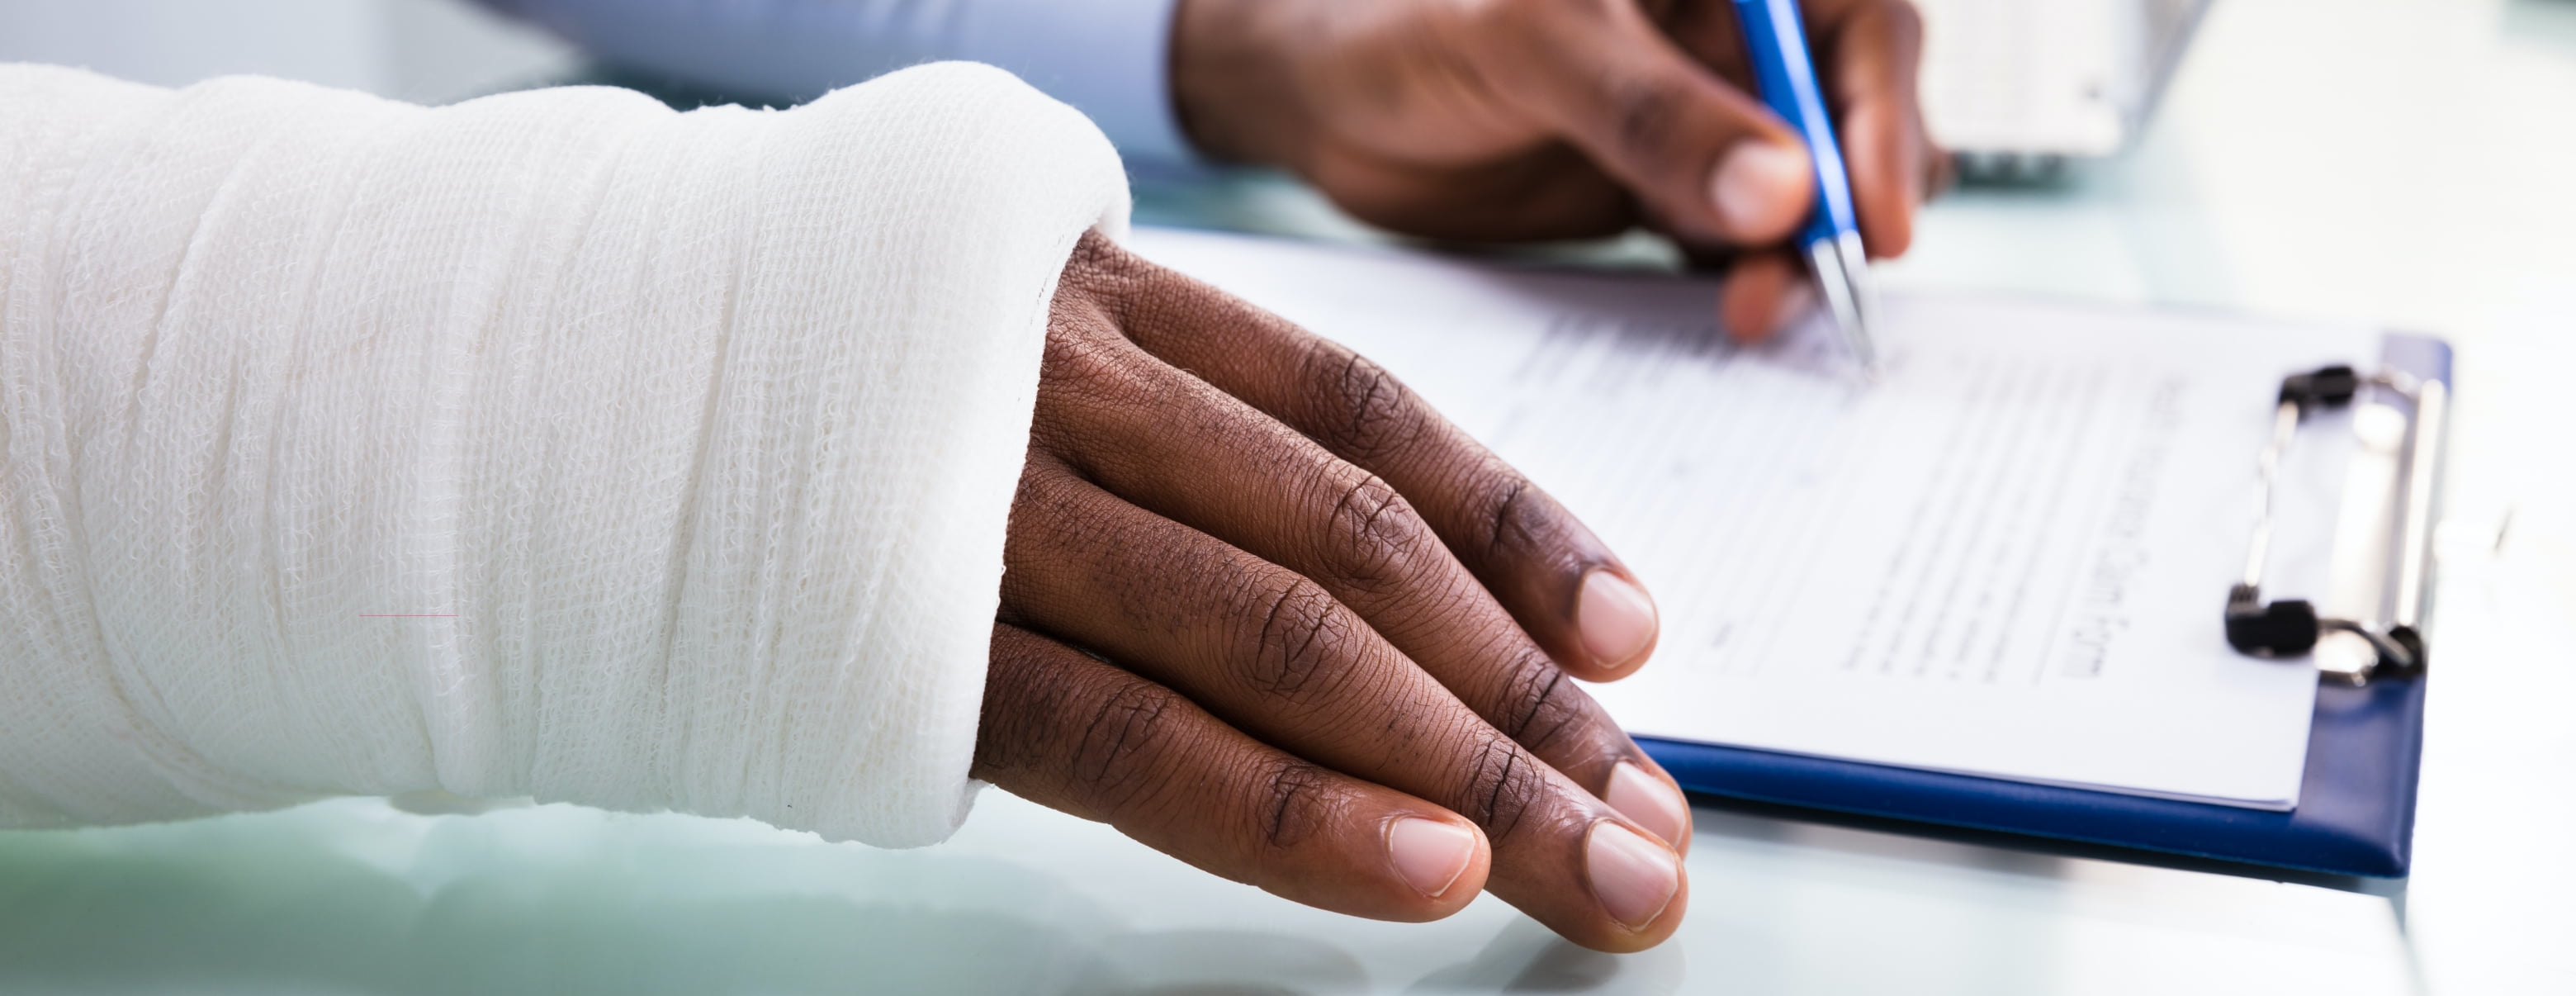 Hand injured in workers' compensation claim in California